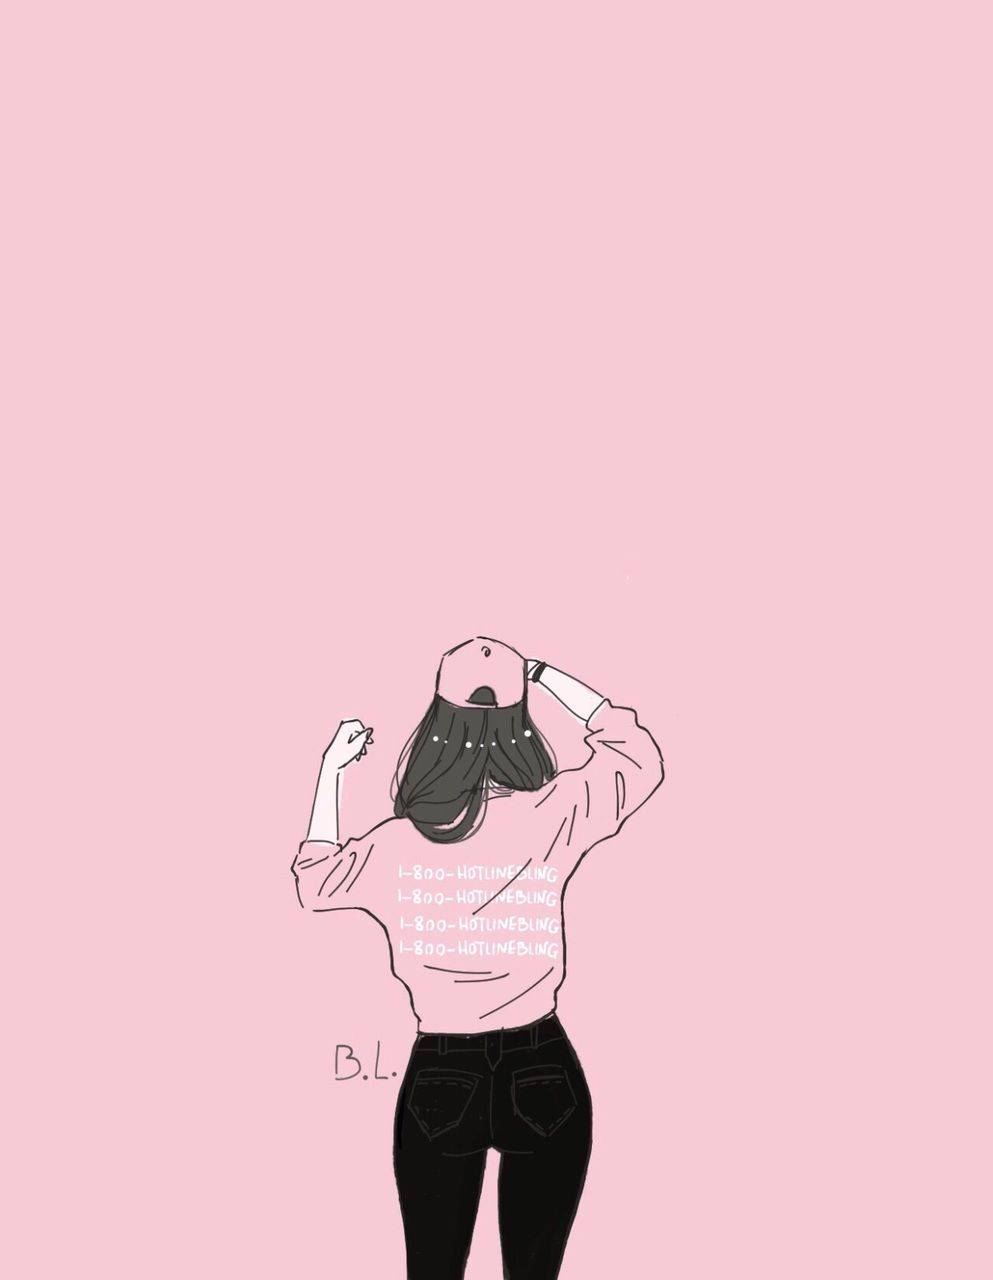 Hotline bling wallpaper discovered by priscila.ricario